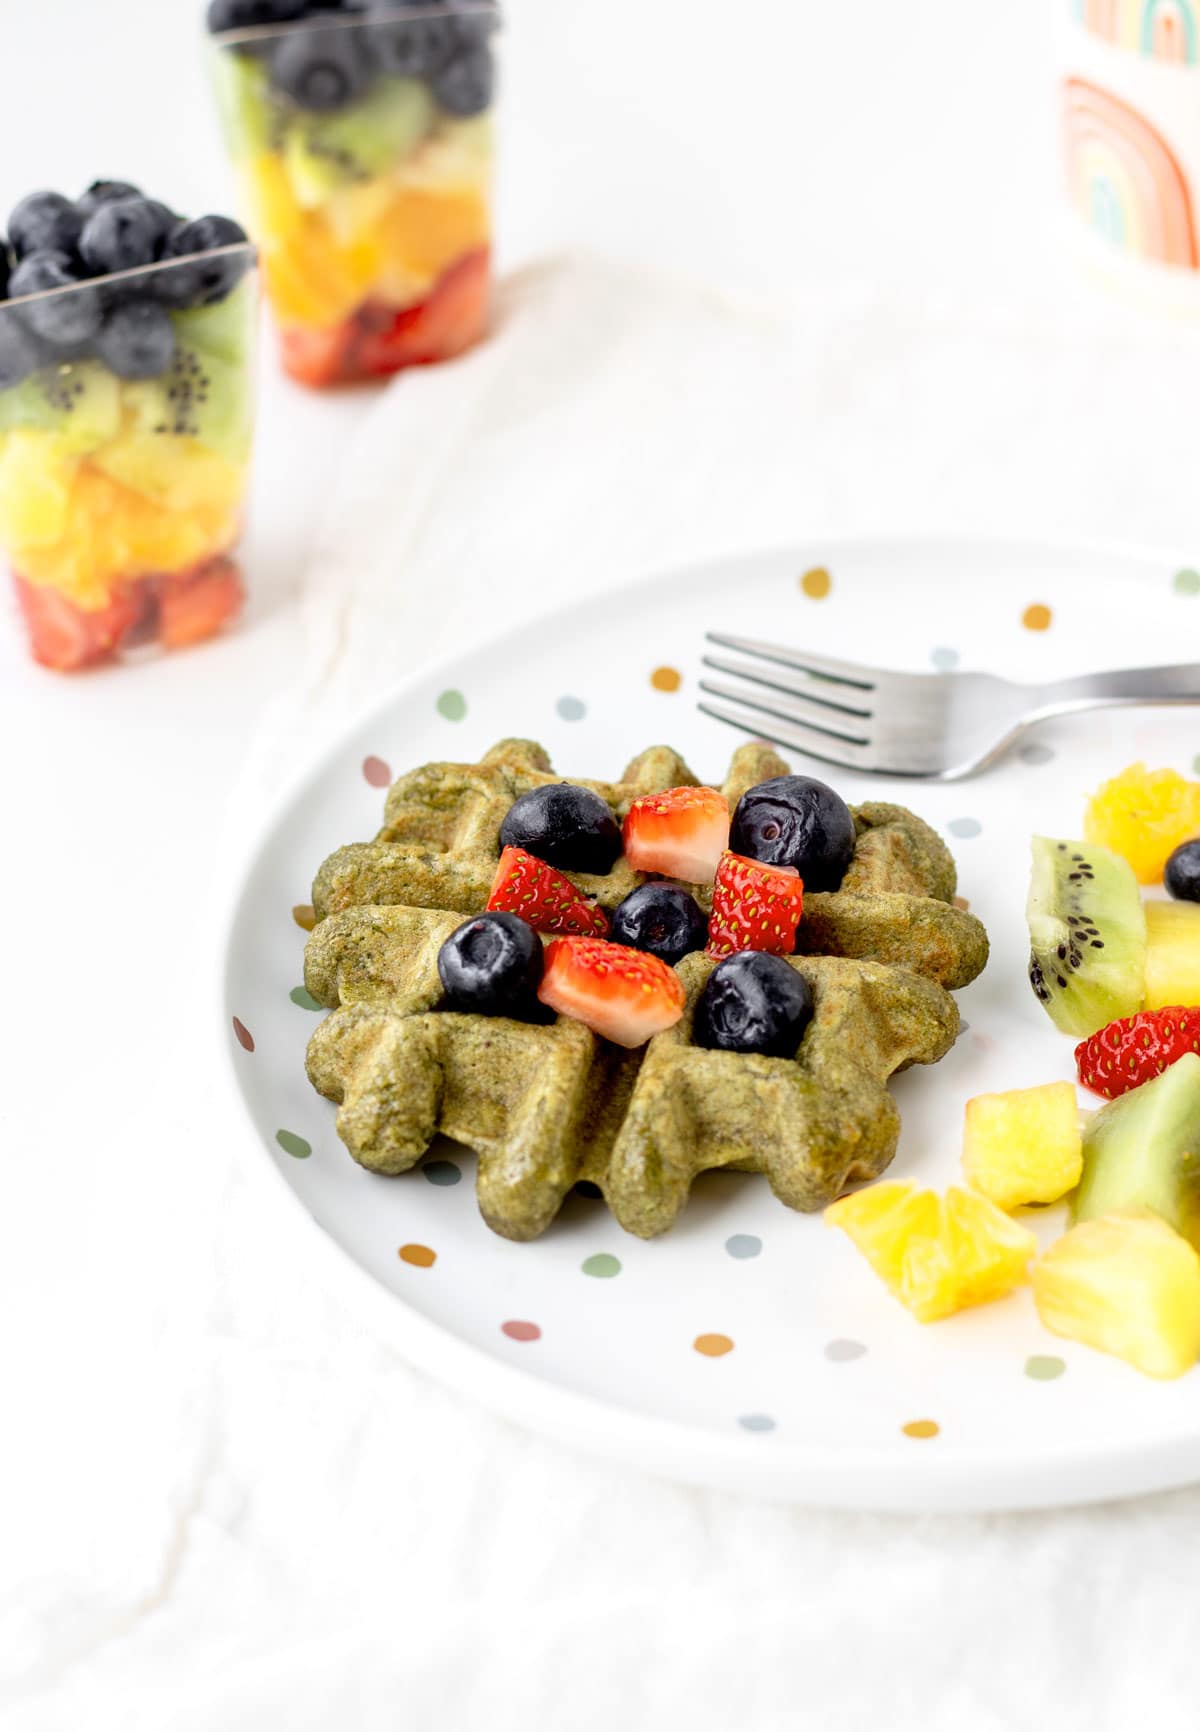 A close-up of the spinach banana waffle topped with berries on a plate next to berries.